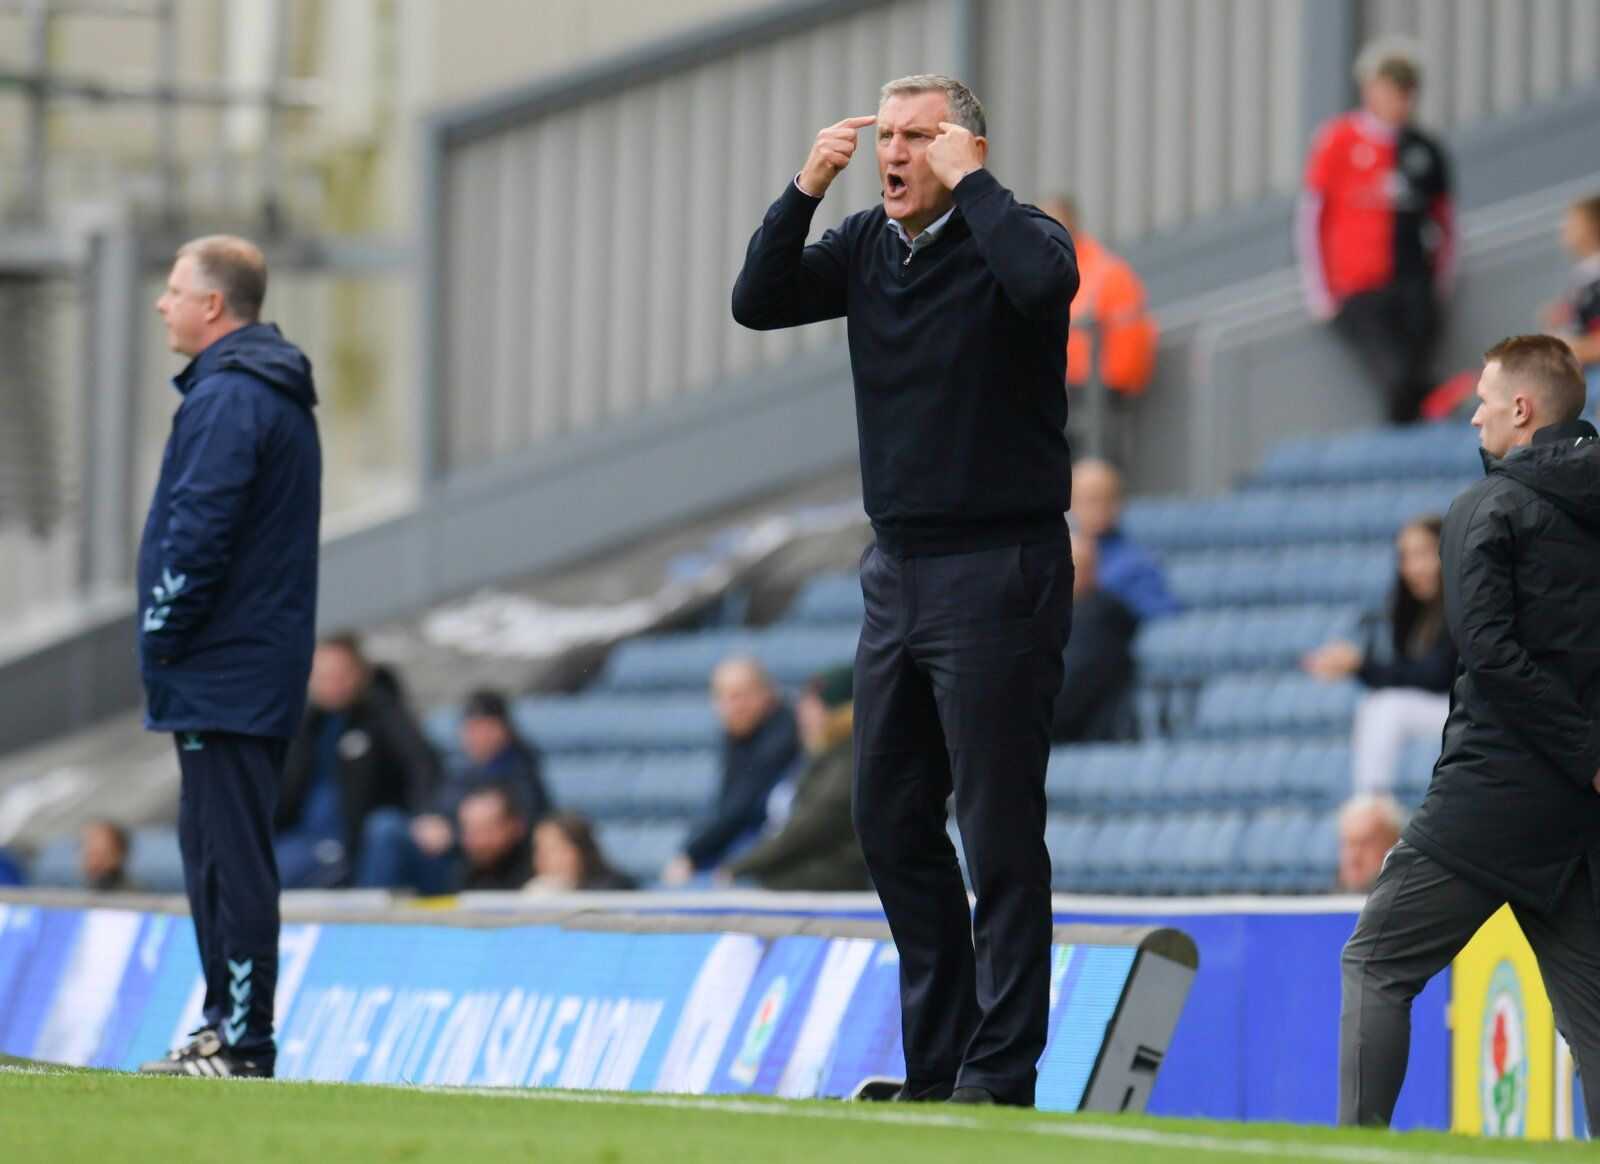 Soccer Football - Championship - Blackburn Rovers v Coventry City - Ewood Park, Blackburn, Britain - October 16, 2021 Blackburn Rovers manager Tony Mowbray reacts Action Images/Paul Burrows  EDITORIAL USE ONLY. No use with unauthorized audio, video, data, fixture lists, club/league logos or 